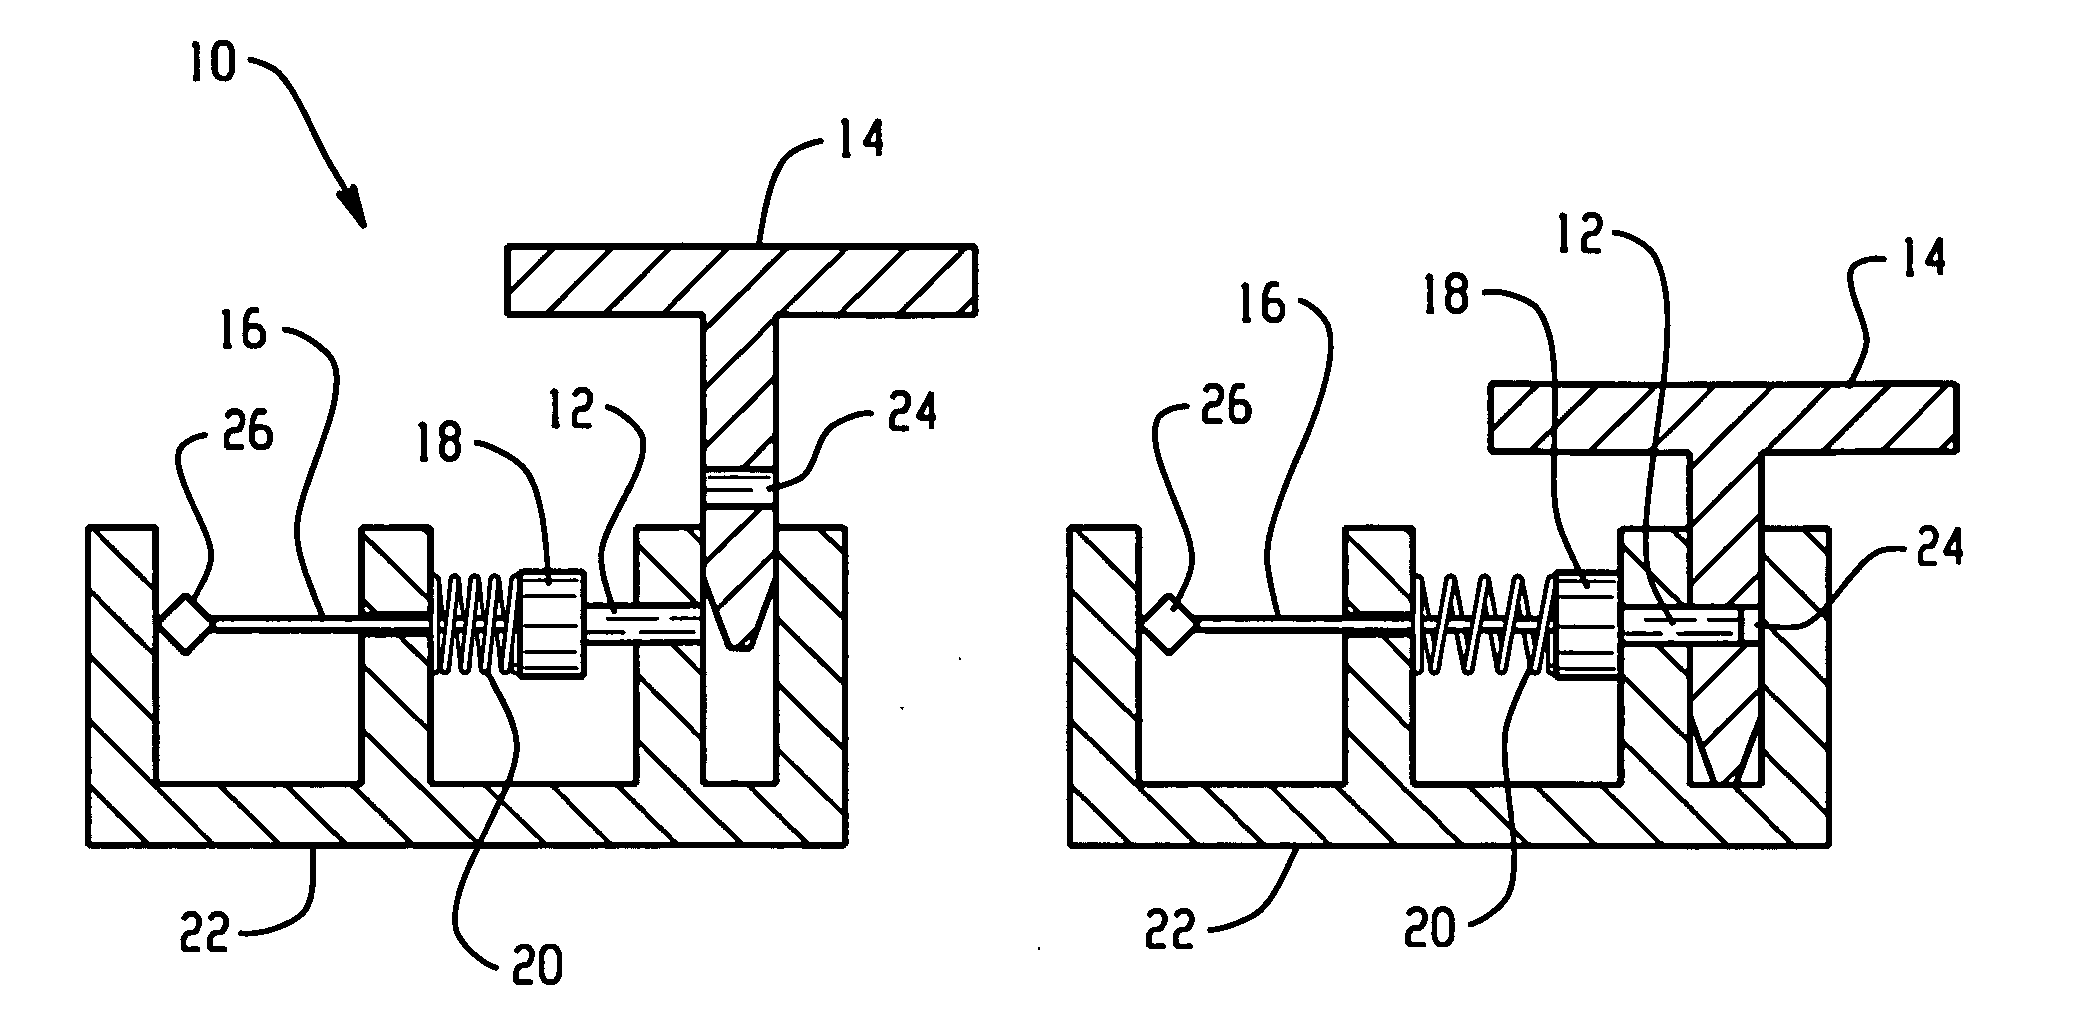 Hood latch assemblies utilizing active materials and methods of use